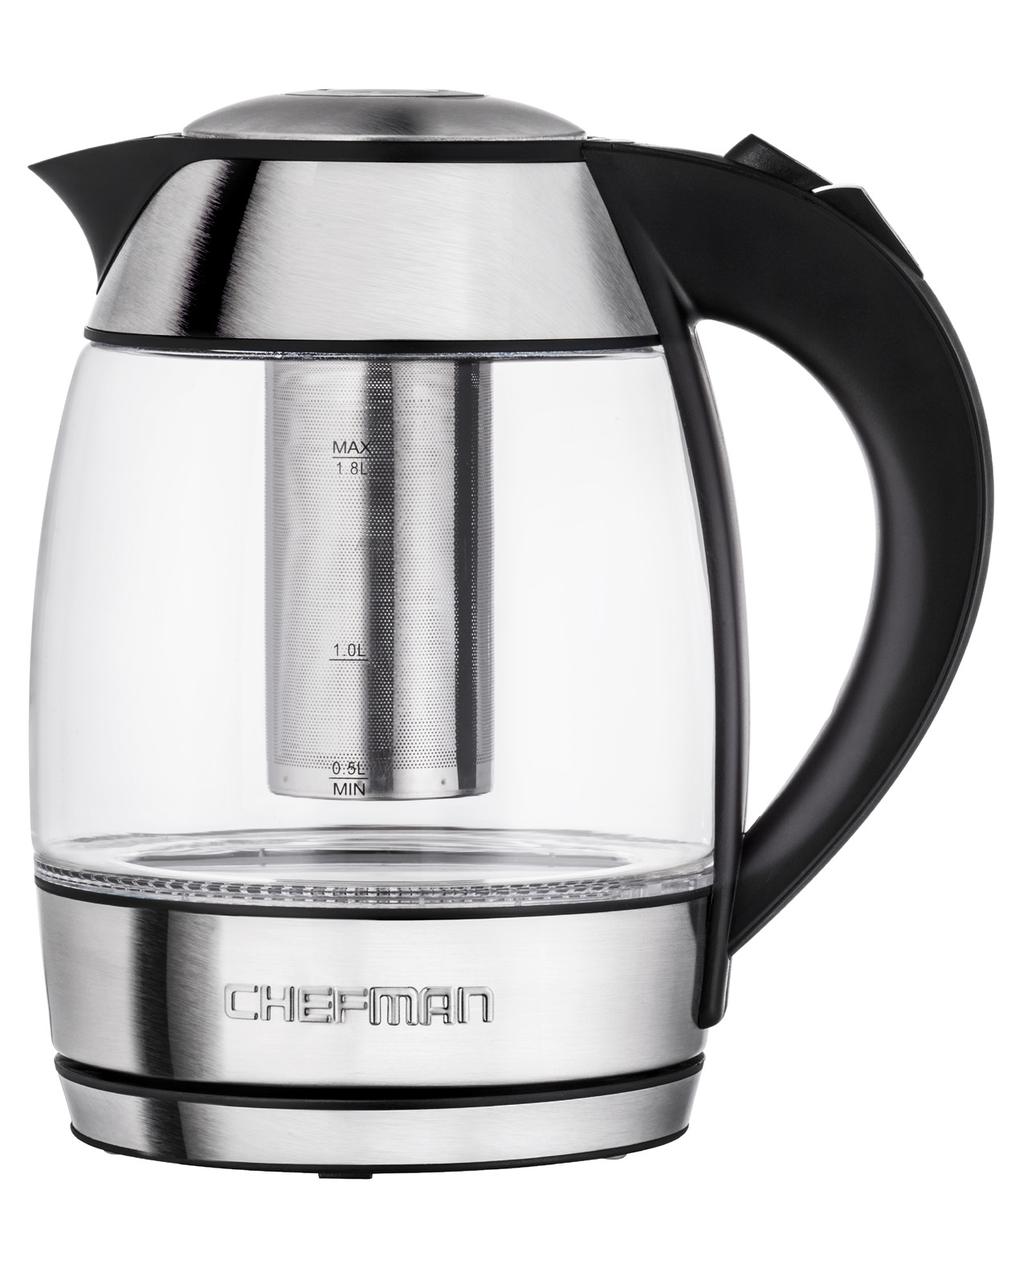 Features 1 8 7 6 5 2 4 3 1. Lid 2. Automatic shut-off for added safety, the kettle automatically shuts itself off once the water has reached a boil 3.